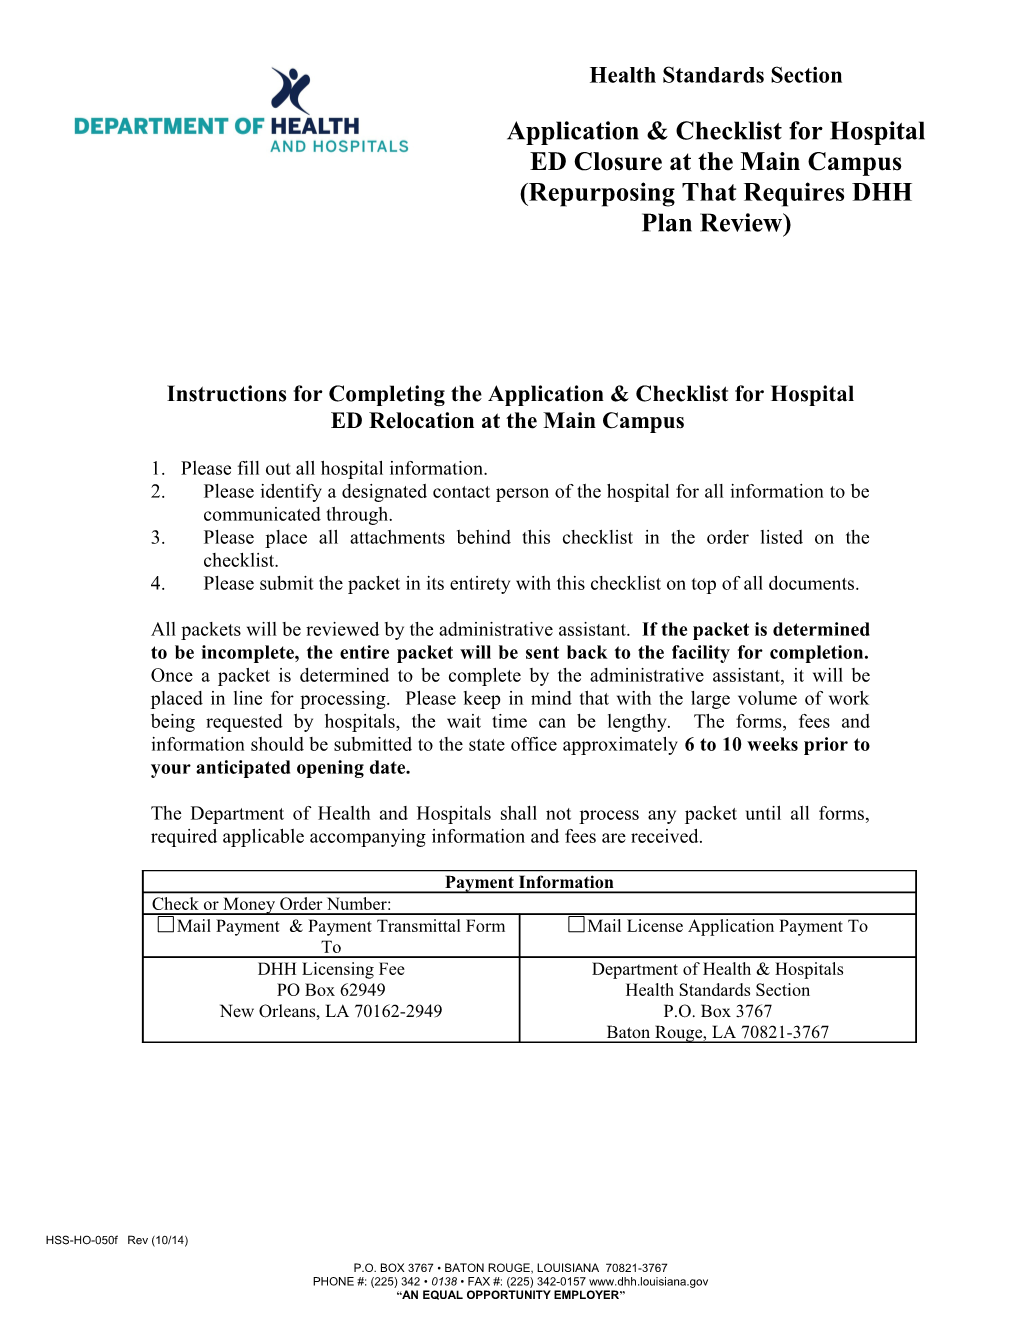 Instructions for Completing the Application & Checklist for Hospital ED Relocation At